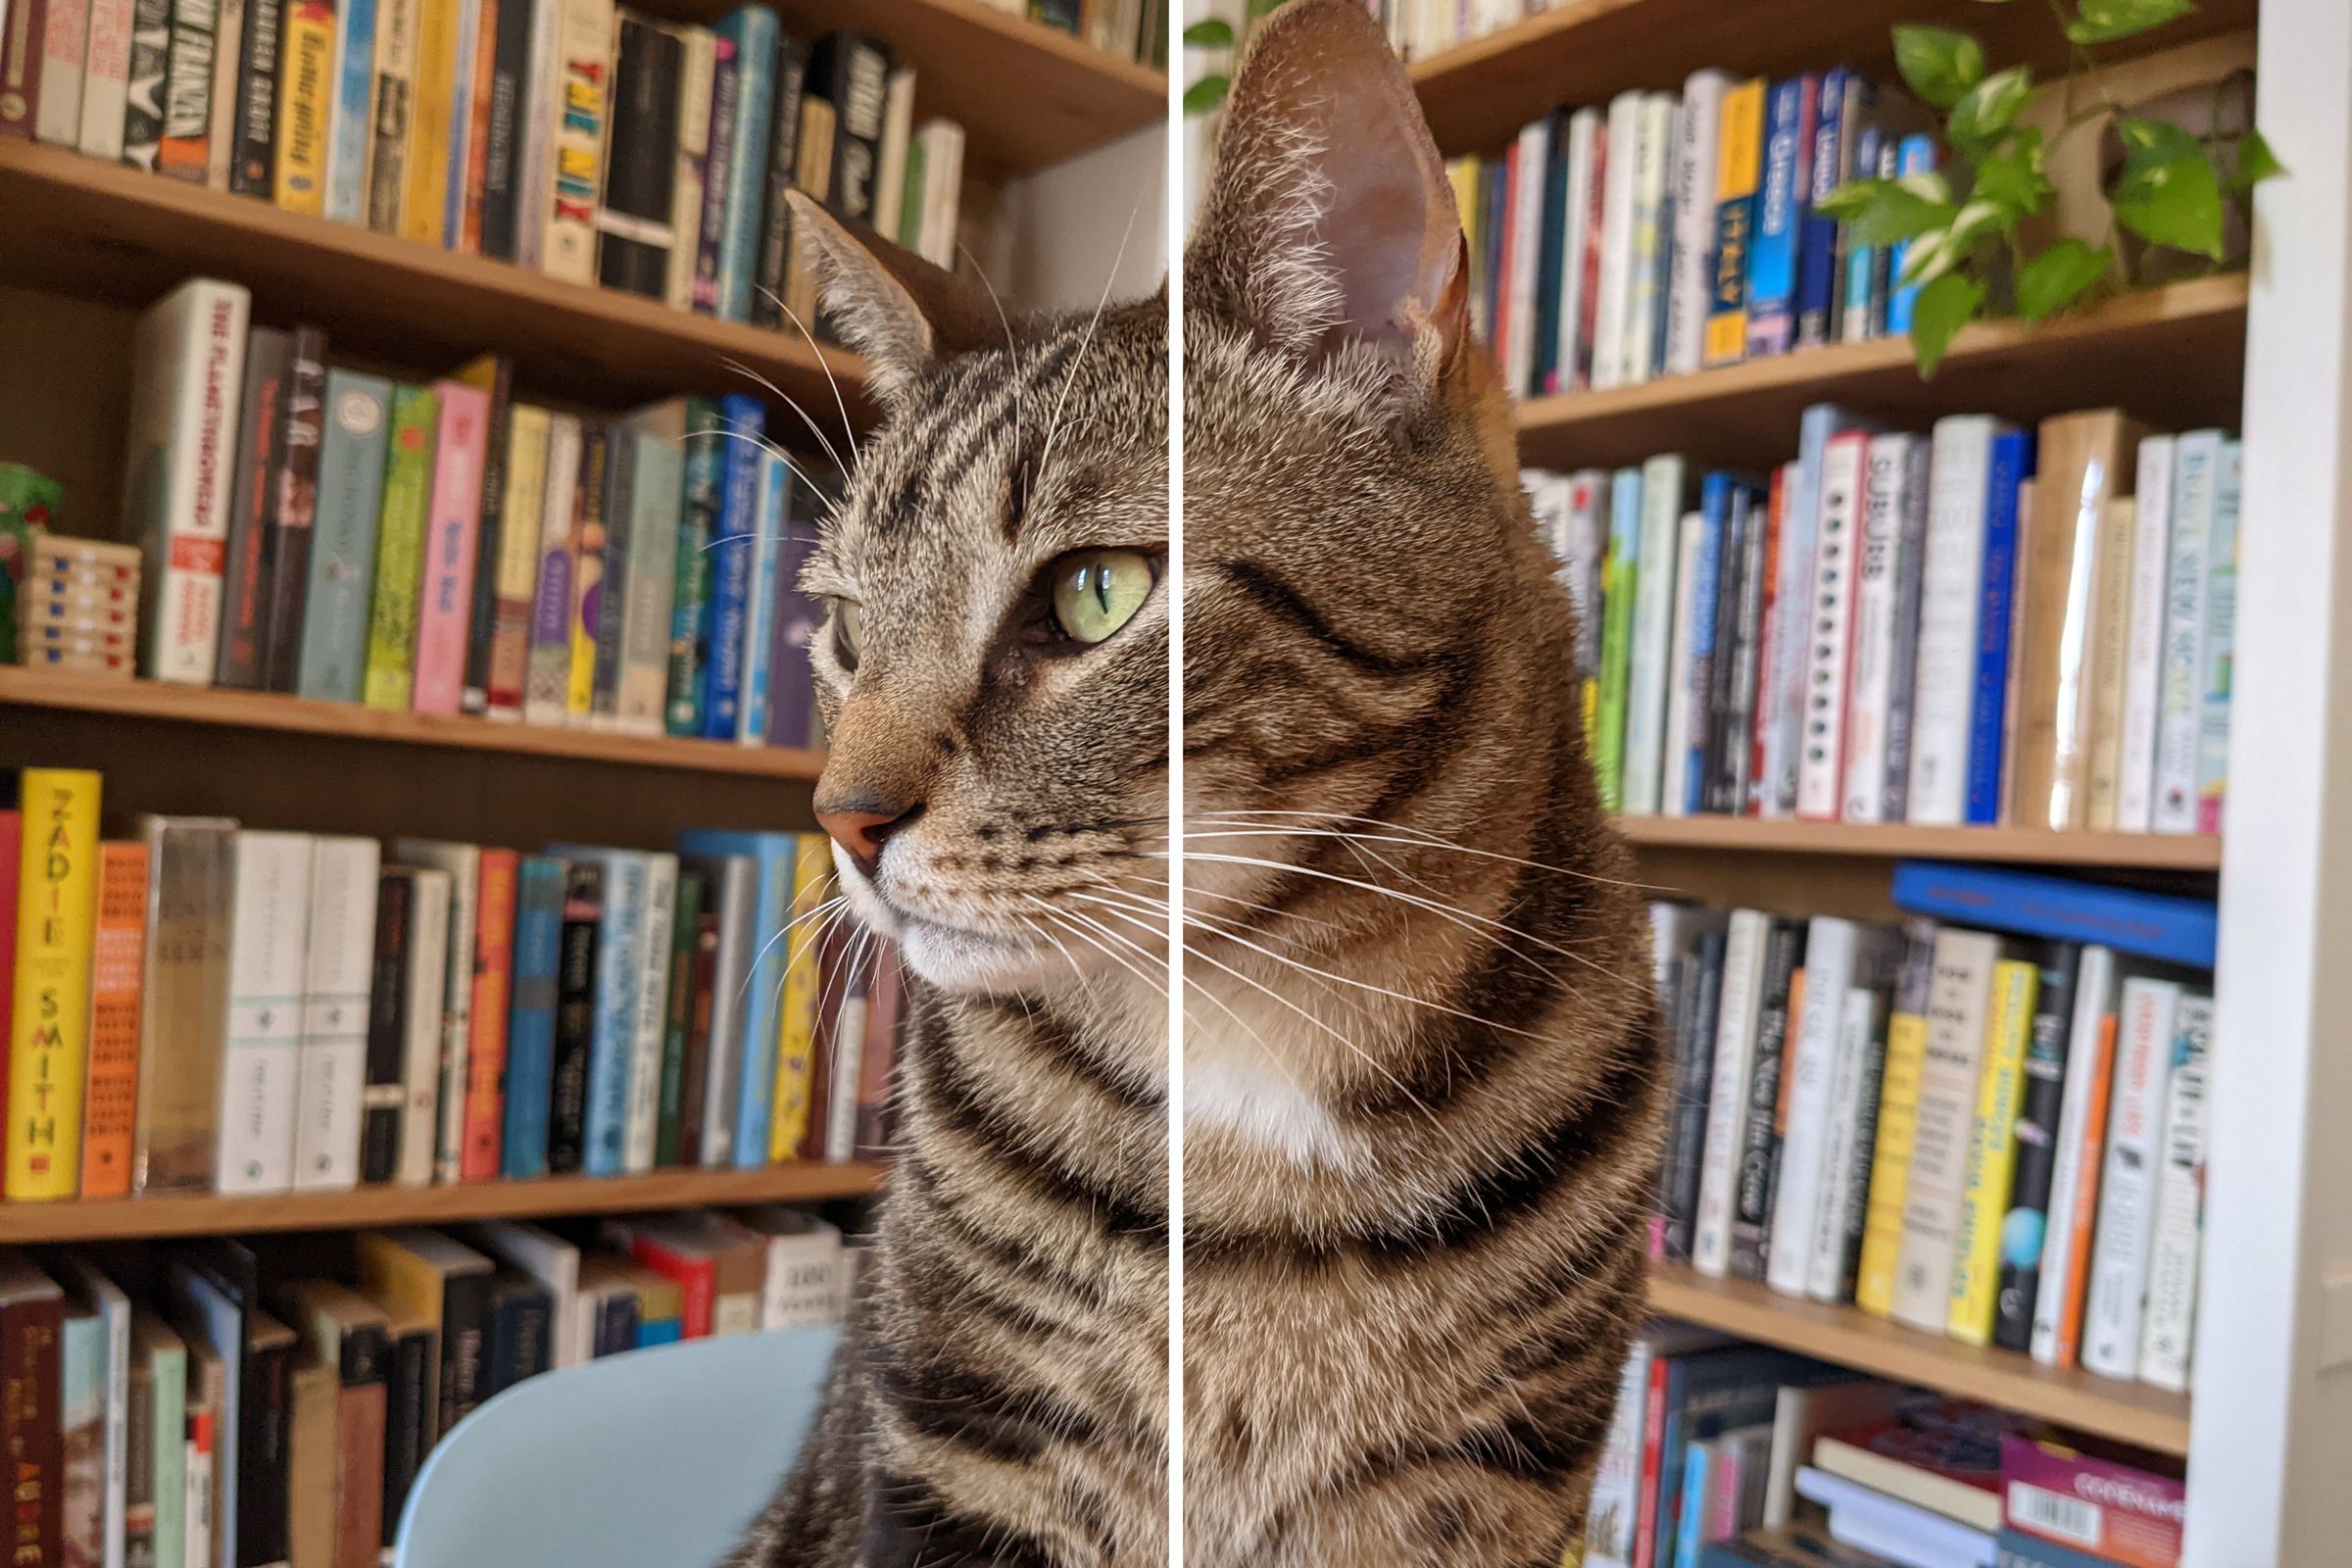 My cat, Pretzel. The original photo is on the left, the compressed version is on the right.